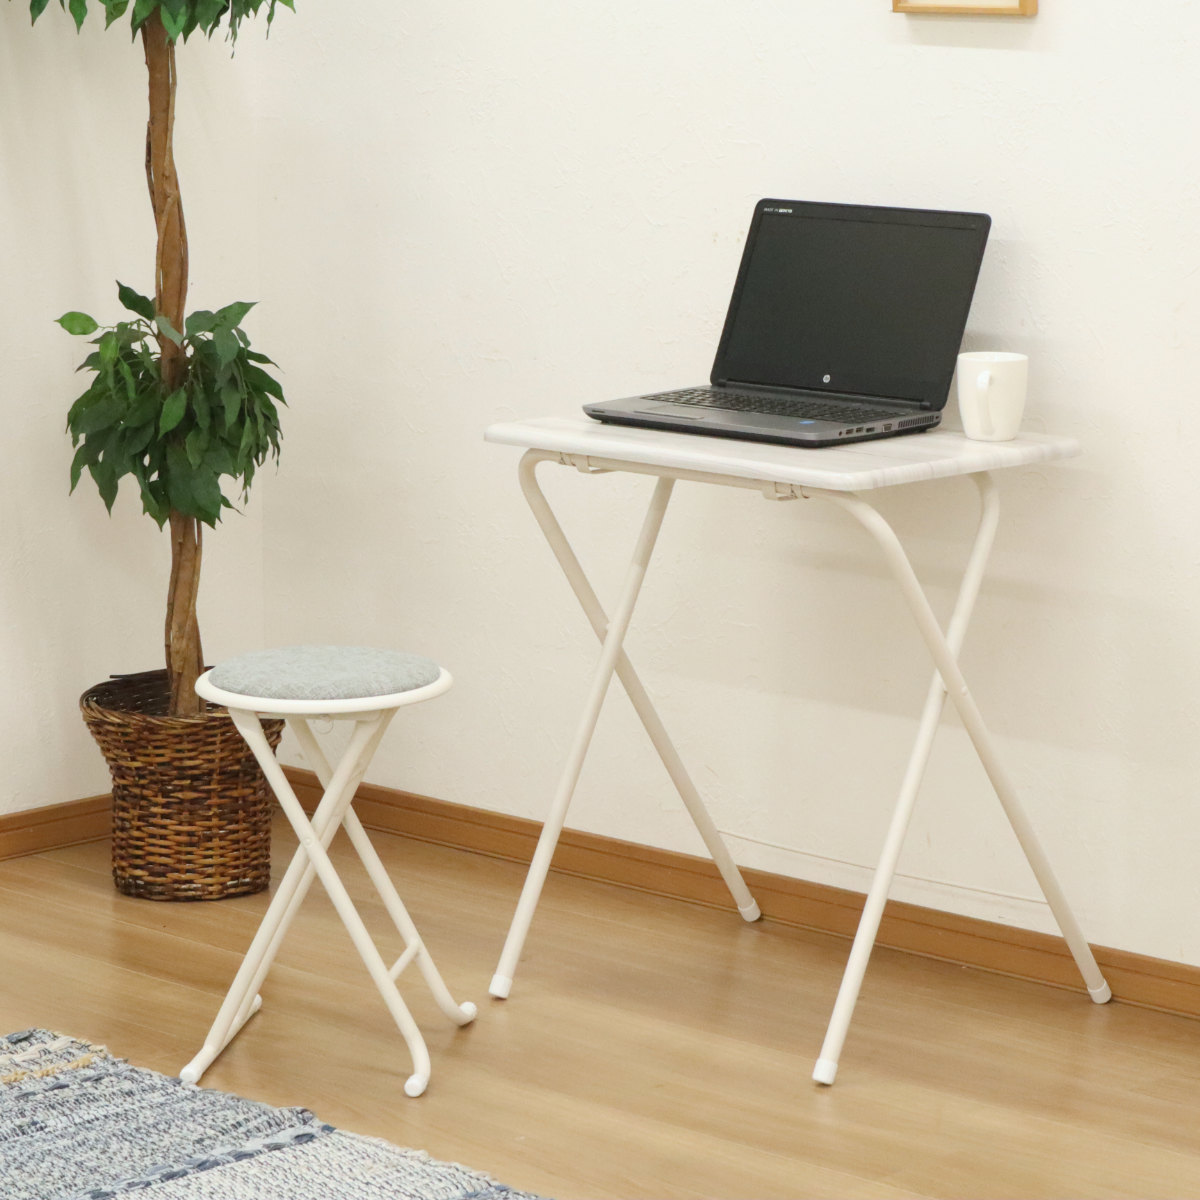  folding chair table set bearing surface height 47cm ( compact folding chair chair stool desk desk simple chair simple desk )